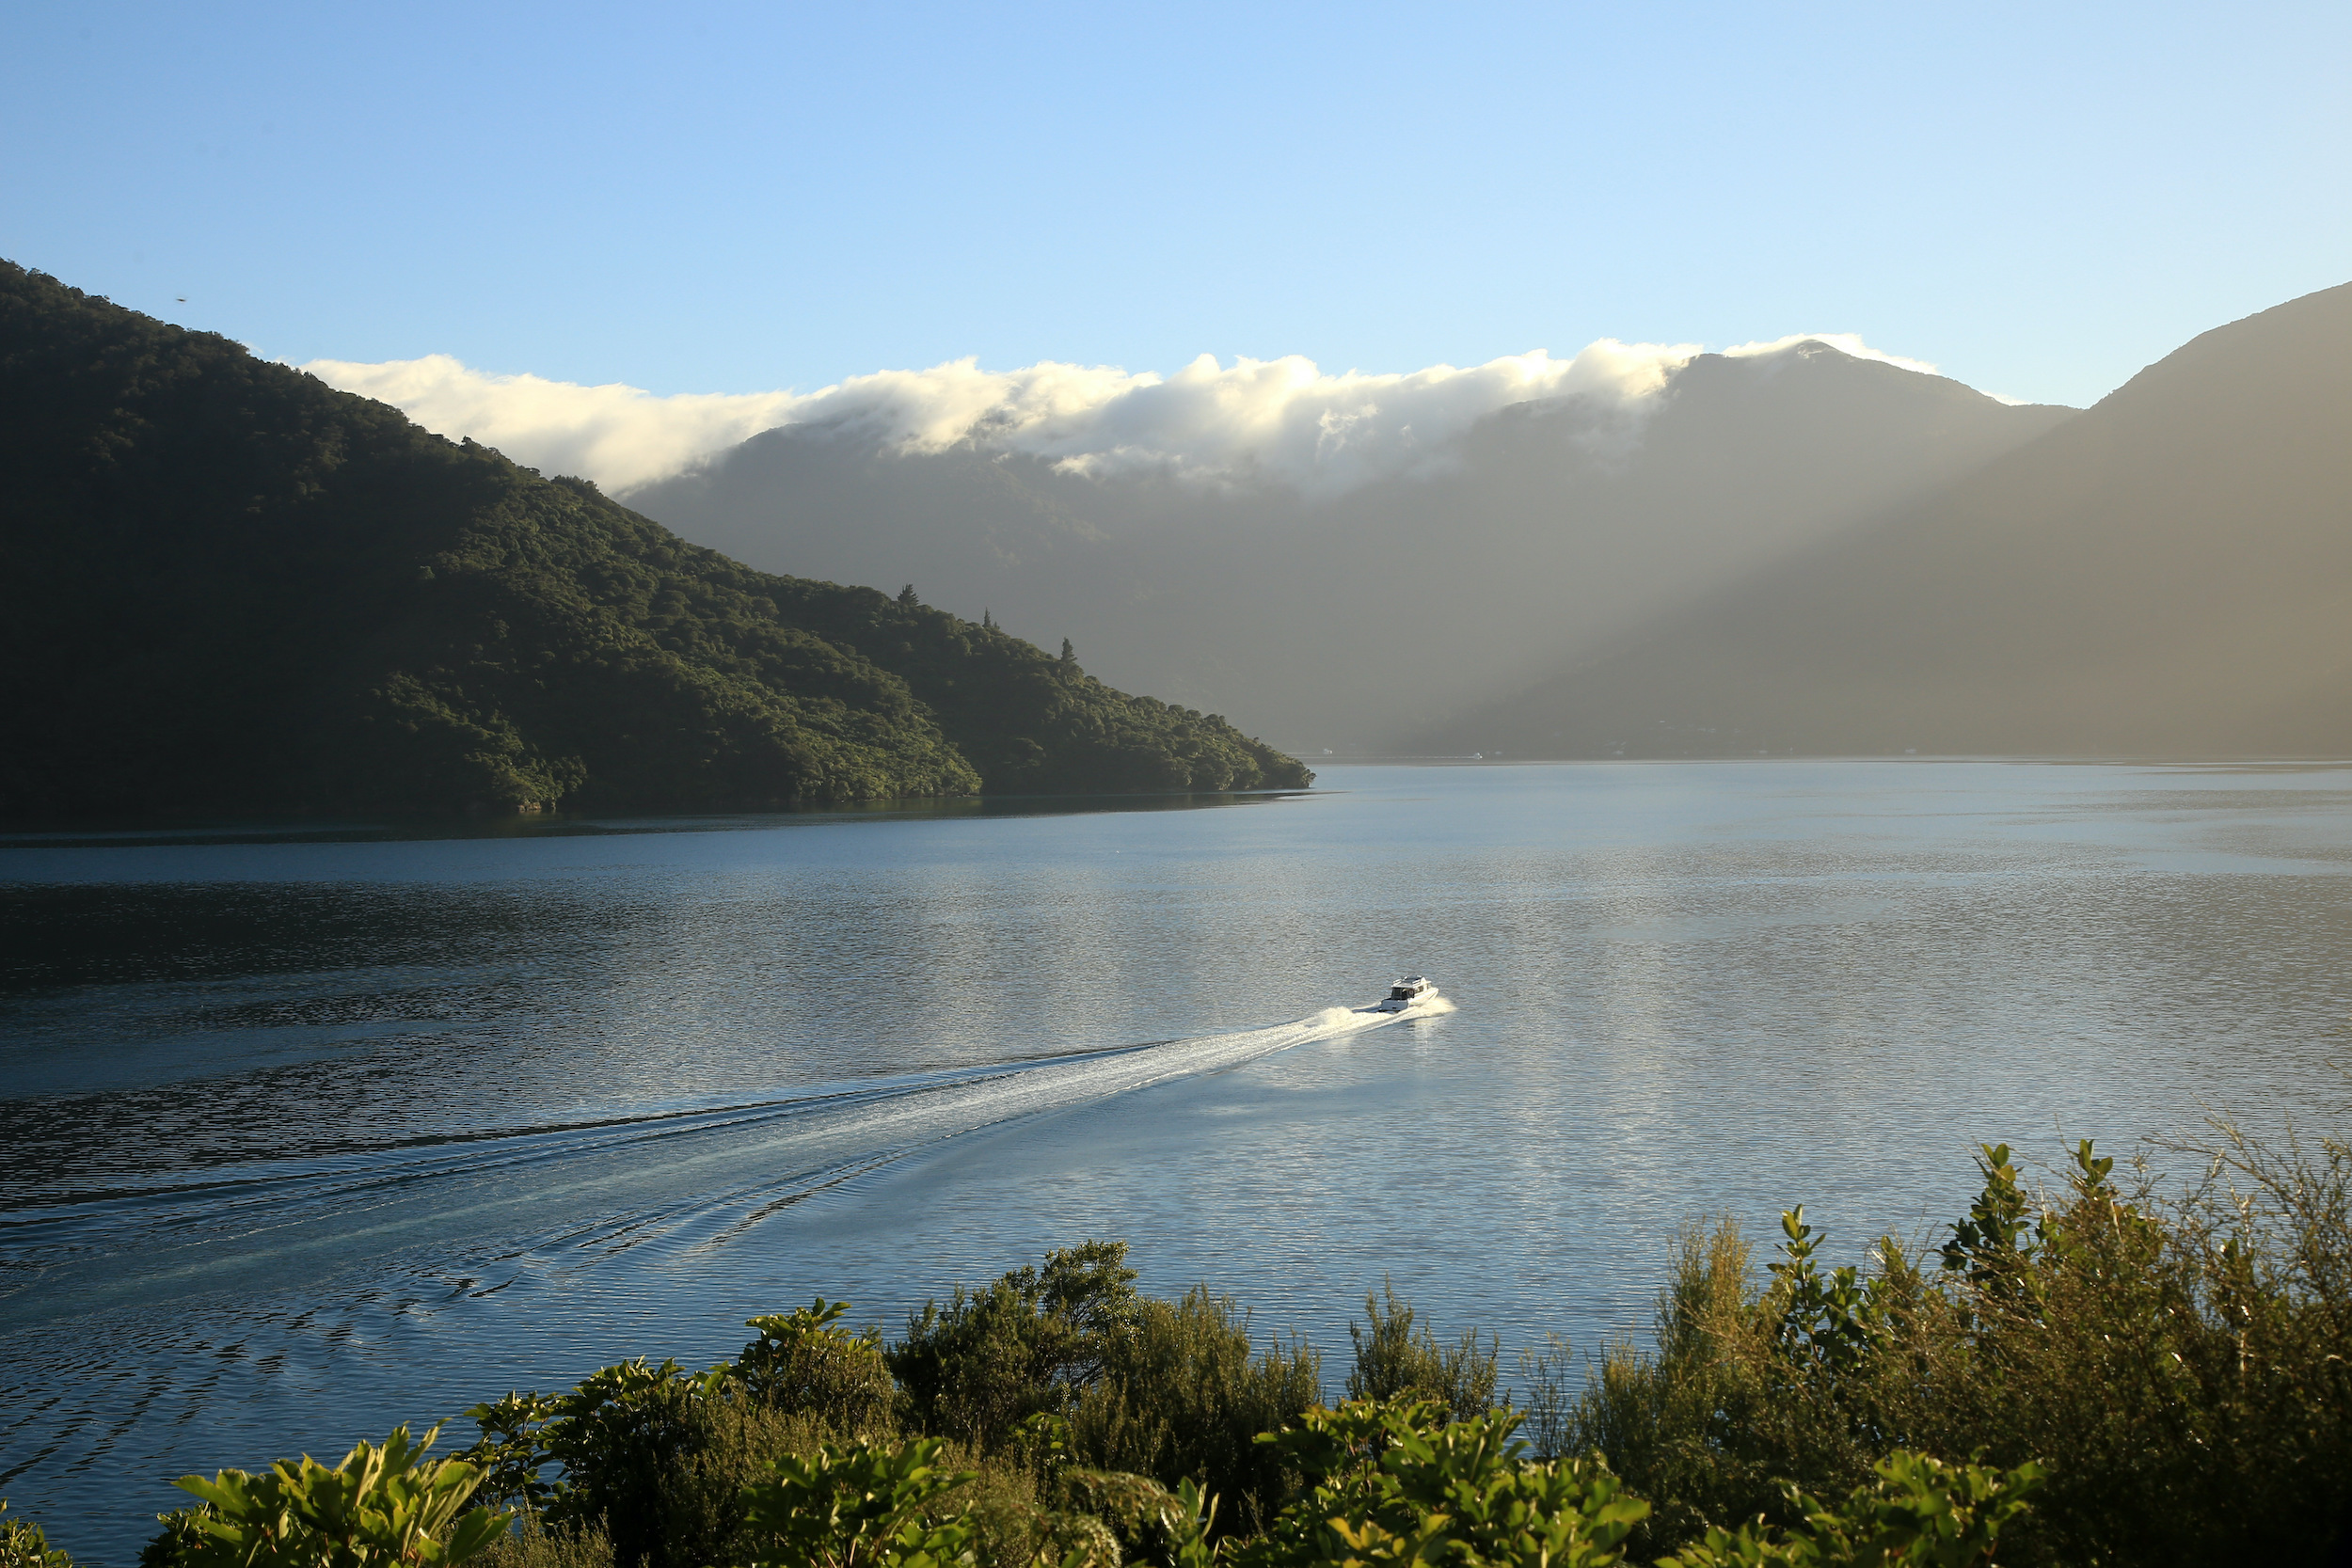 A Cougar Line boat leaves a wake in the calm water as it cruises through the Marlborough Sounds, New Zealand.